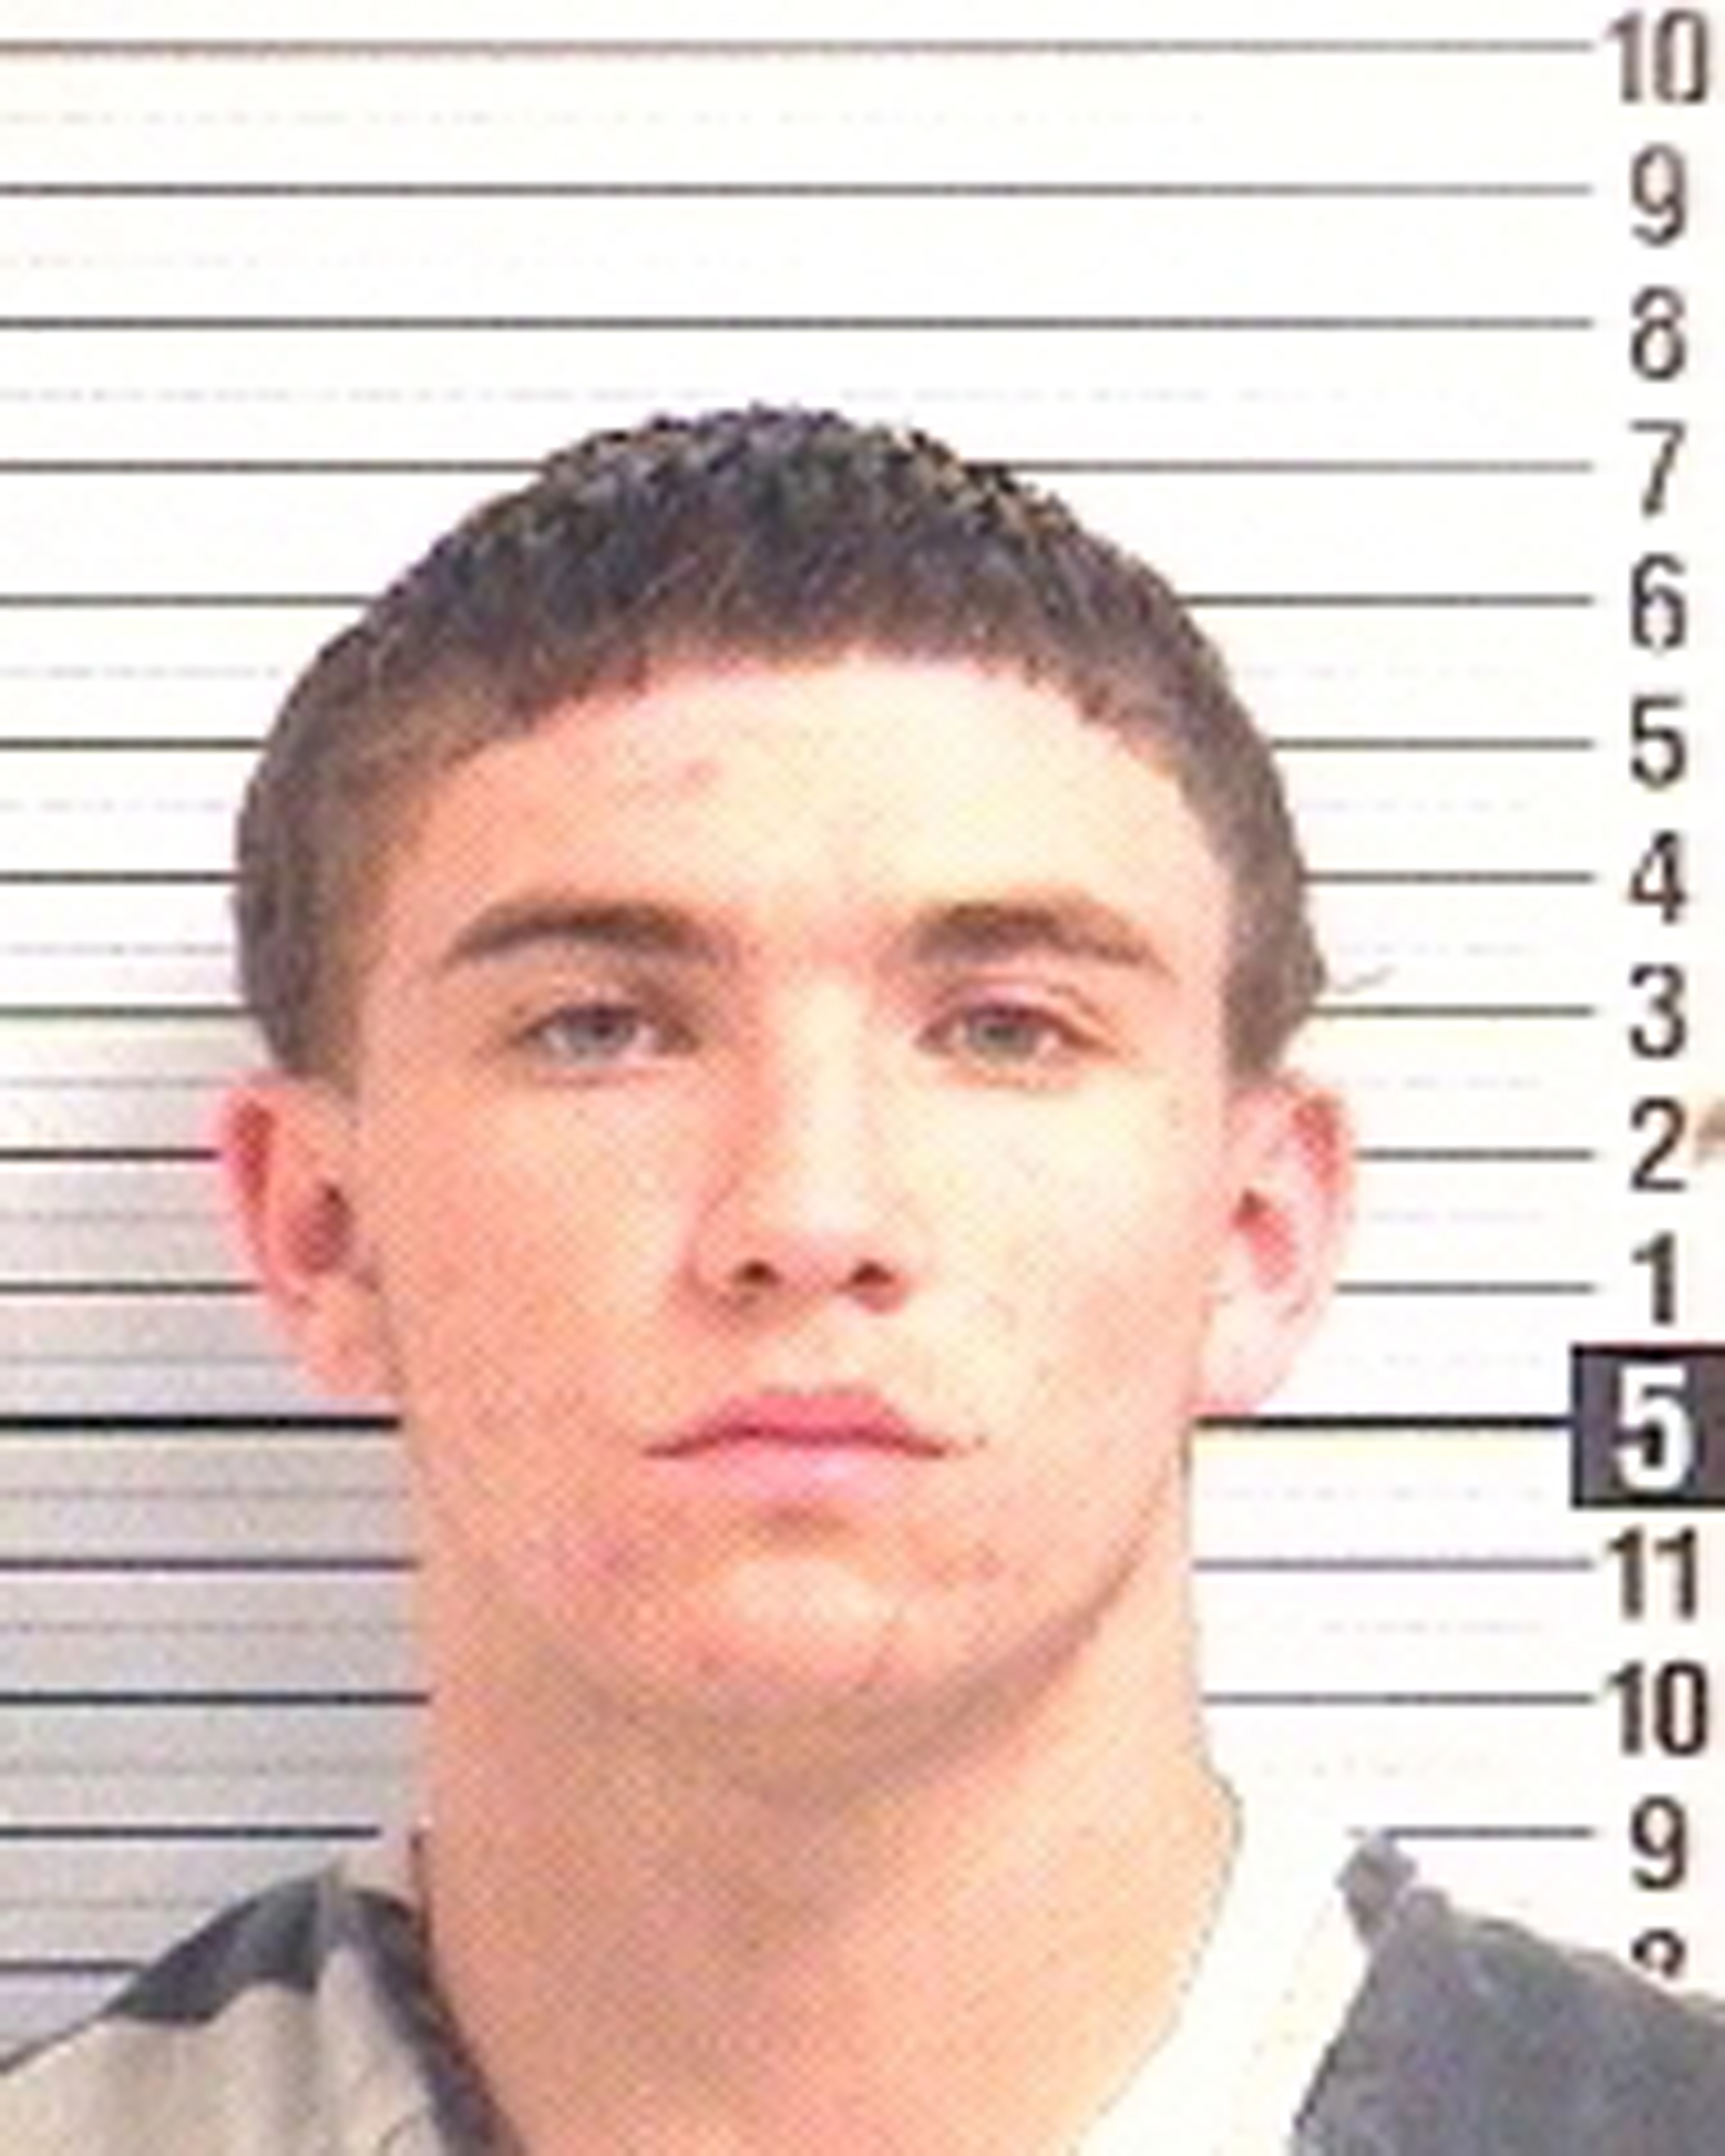 Dalton Hayes, 18, is shown in this Bay County Sheriff's Office booking photo released on January 18, 2015. (Bay County Sheriff's Office—Reuters)